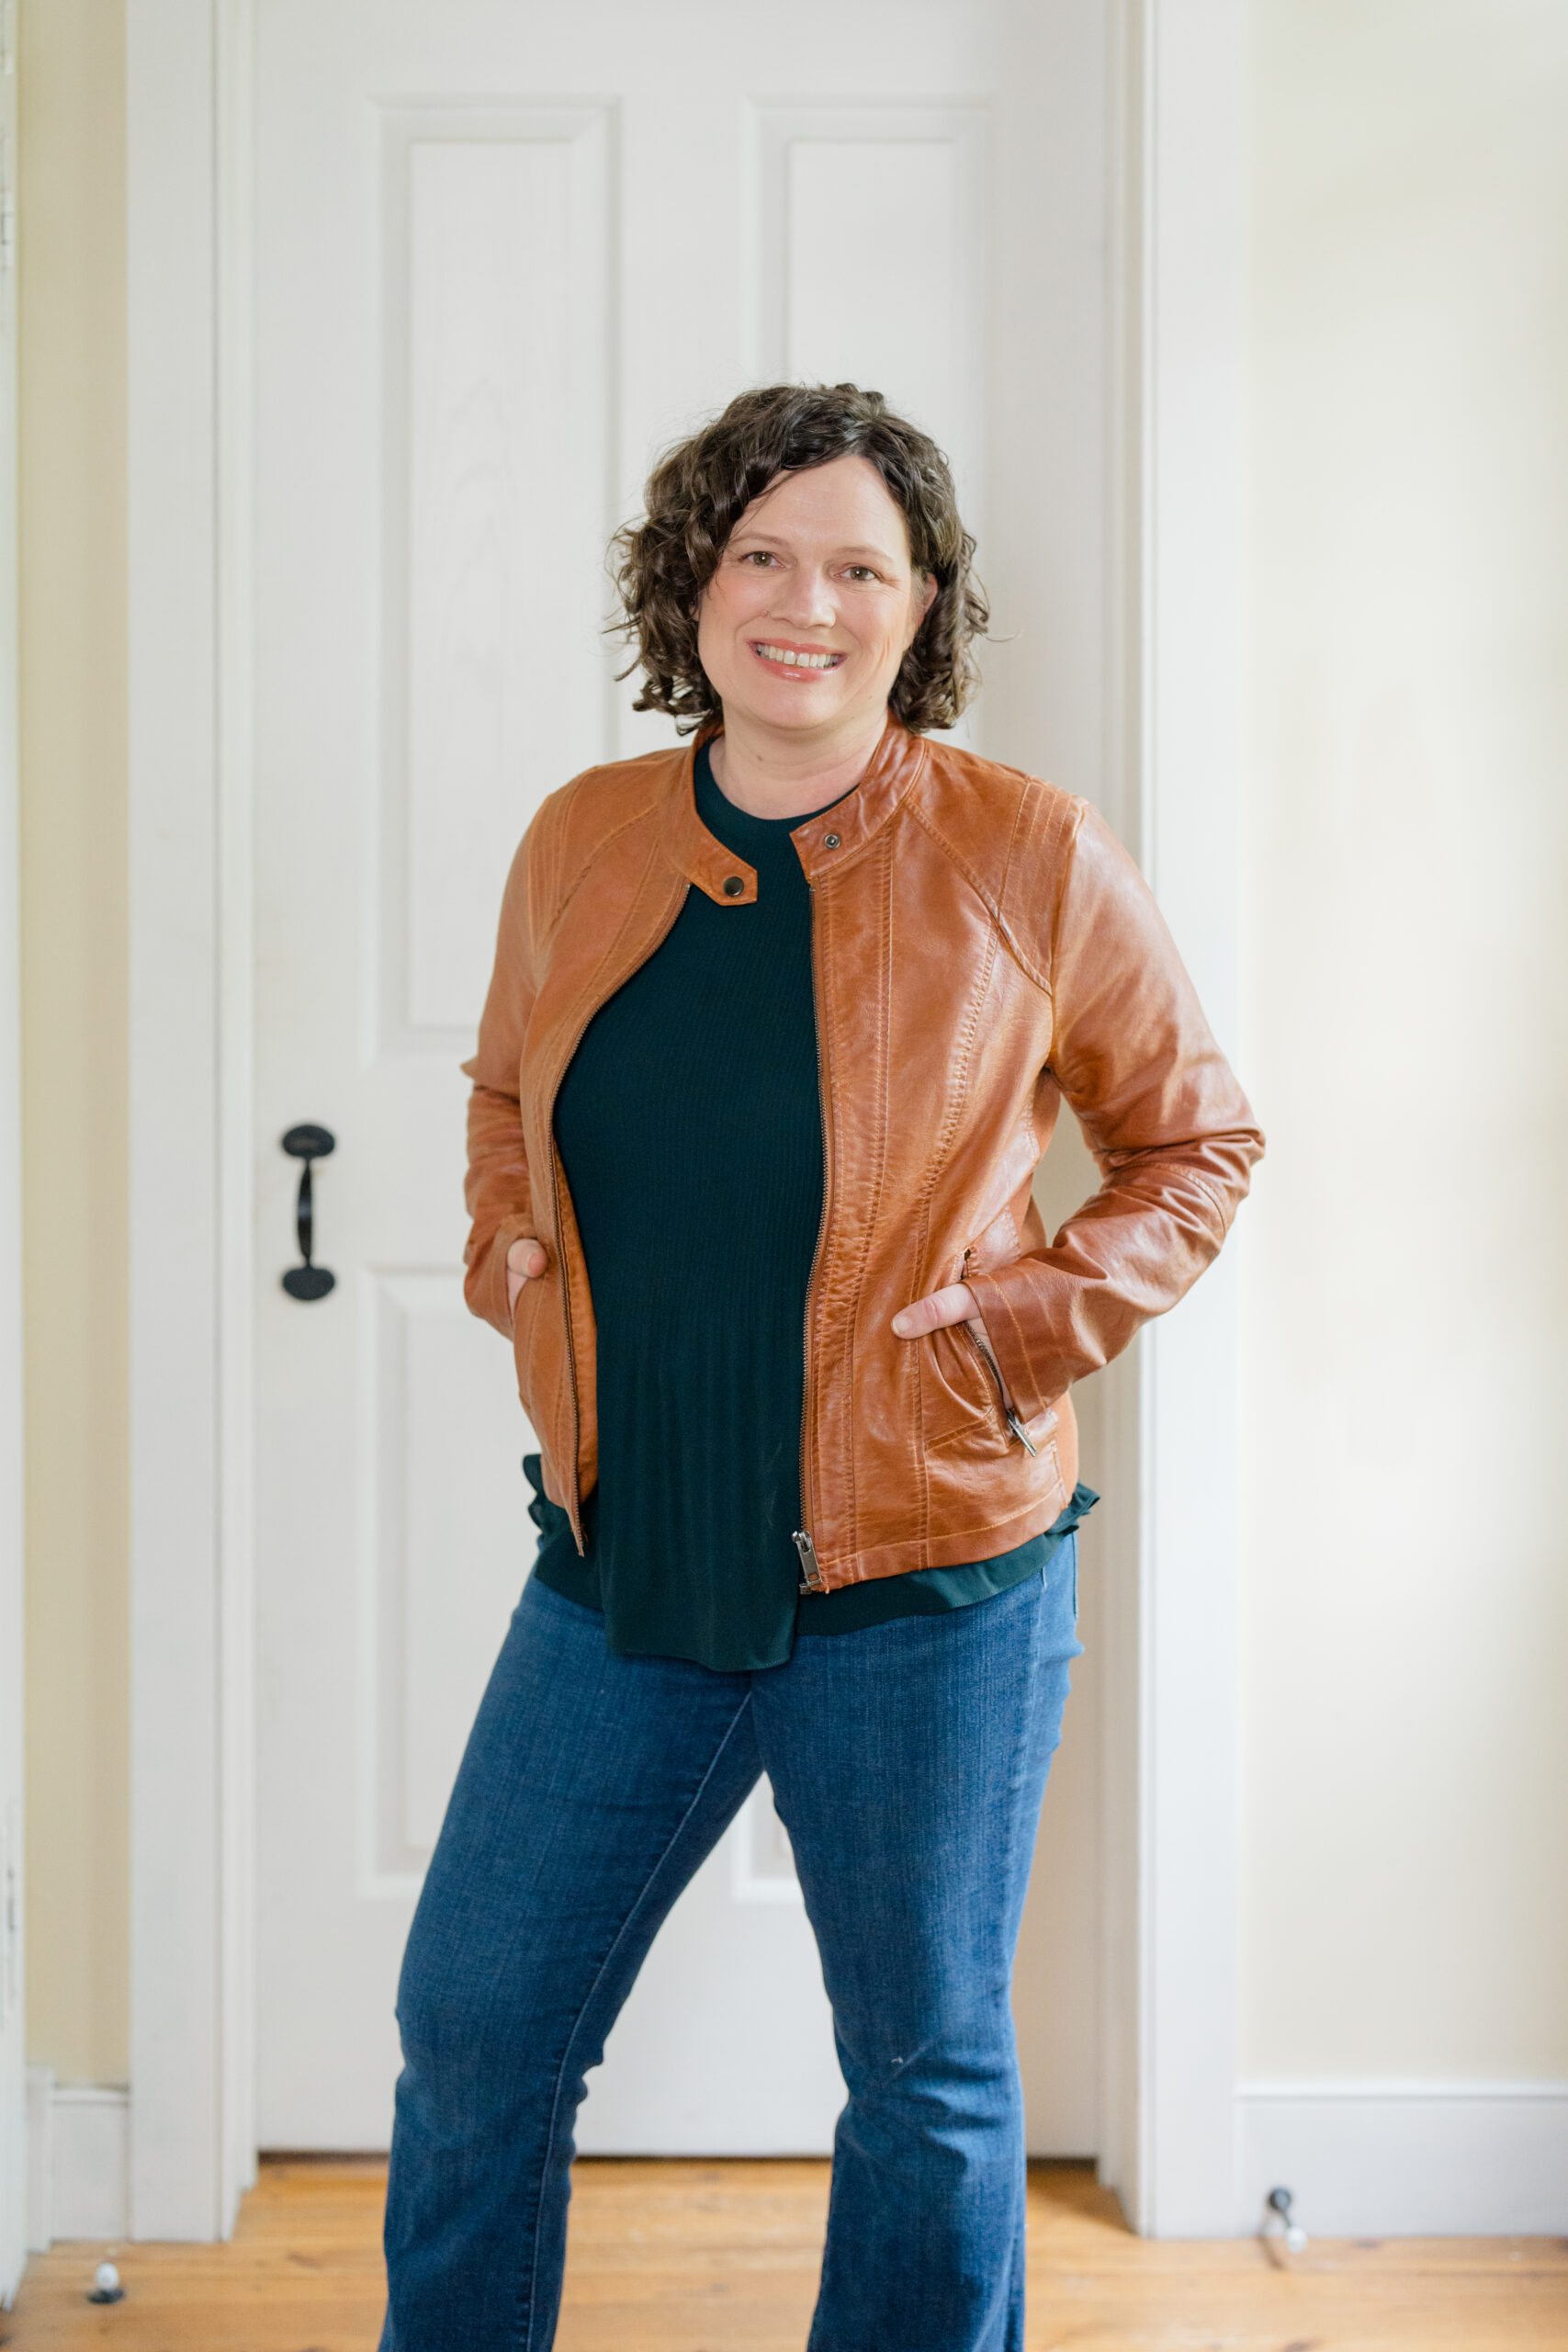 headshot photos with small business owner in dark jeans, a black shirt and a leather jacket standing in a white hallway